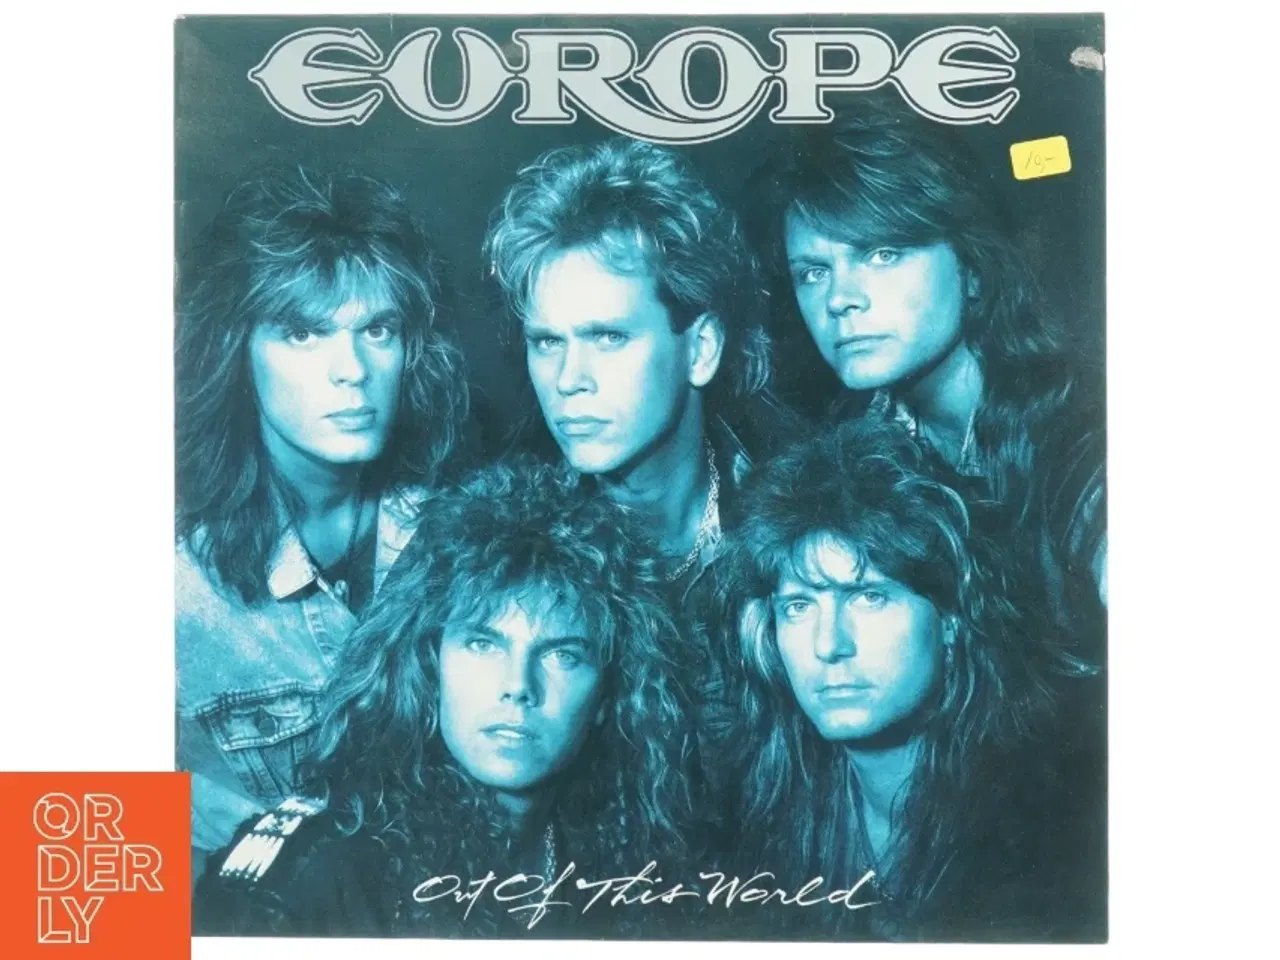 Billede 1 - Europe Out of This World LP  (str. 31 x 31 cm)